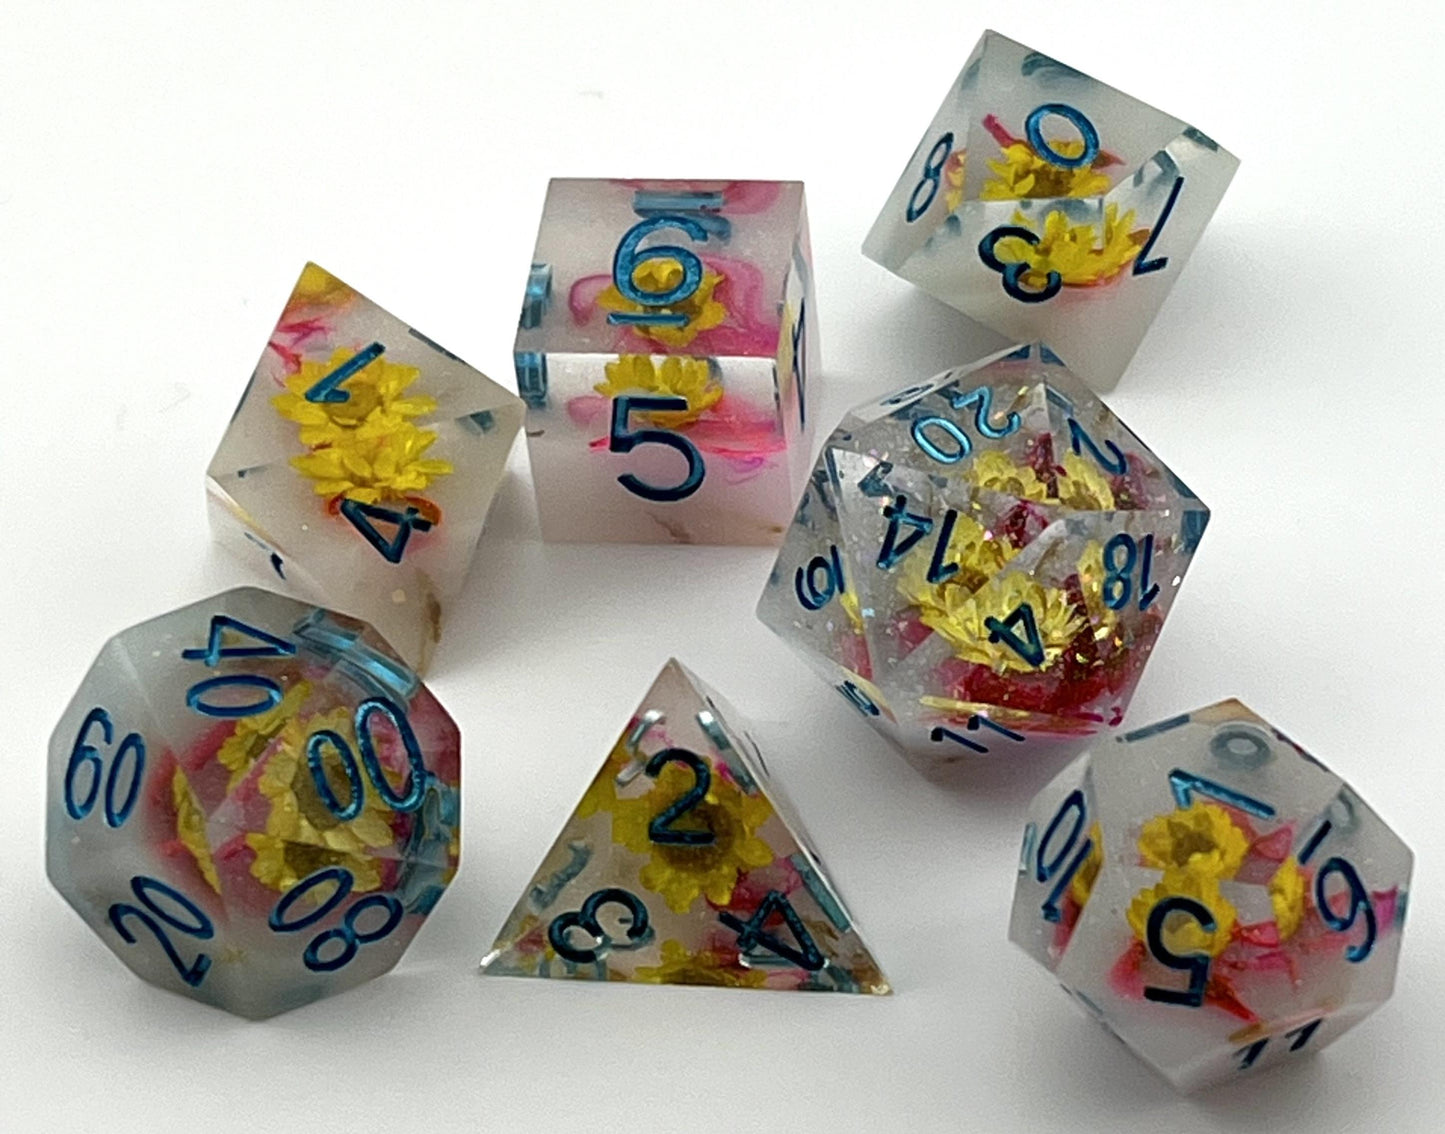 SF-02 Yellow-Flowers-With-Pink Swirl, Flower-Series, Sharp-Edged, Resin Dice Set